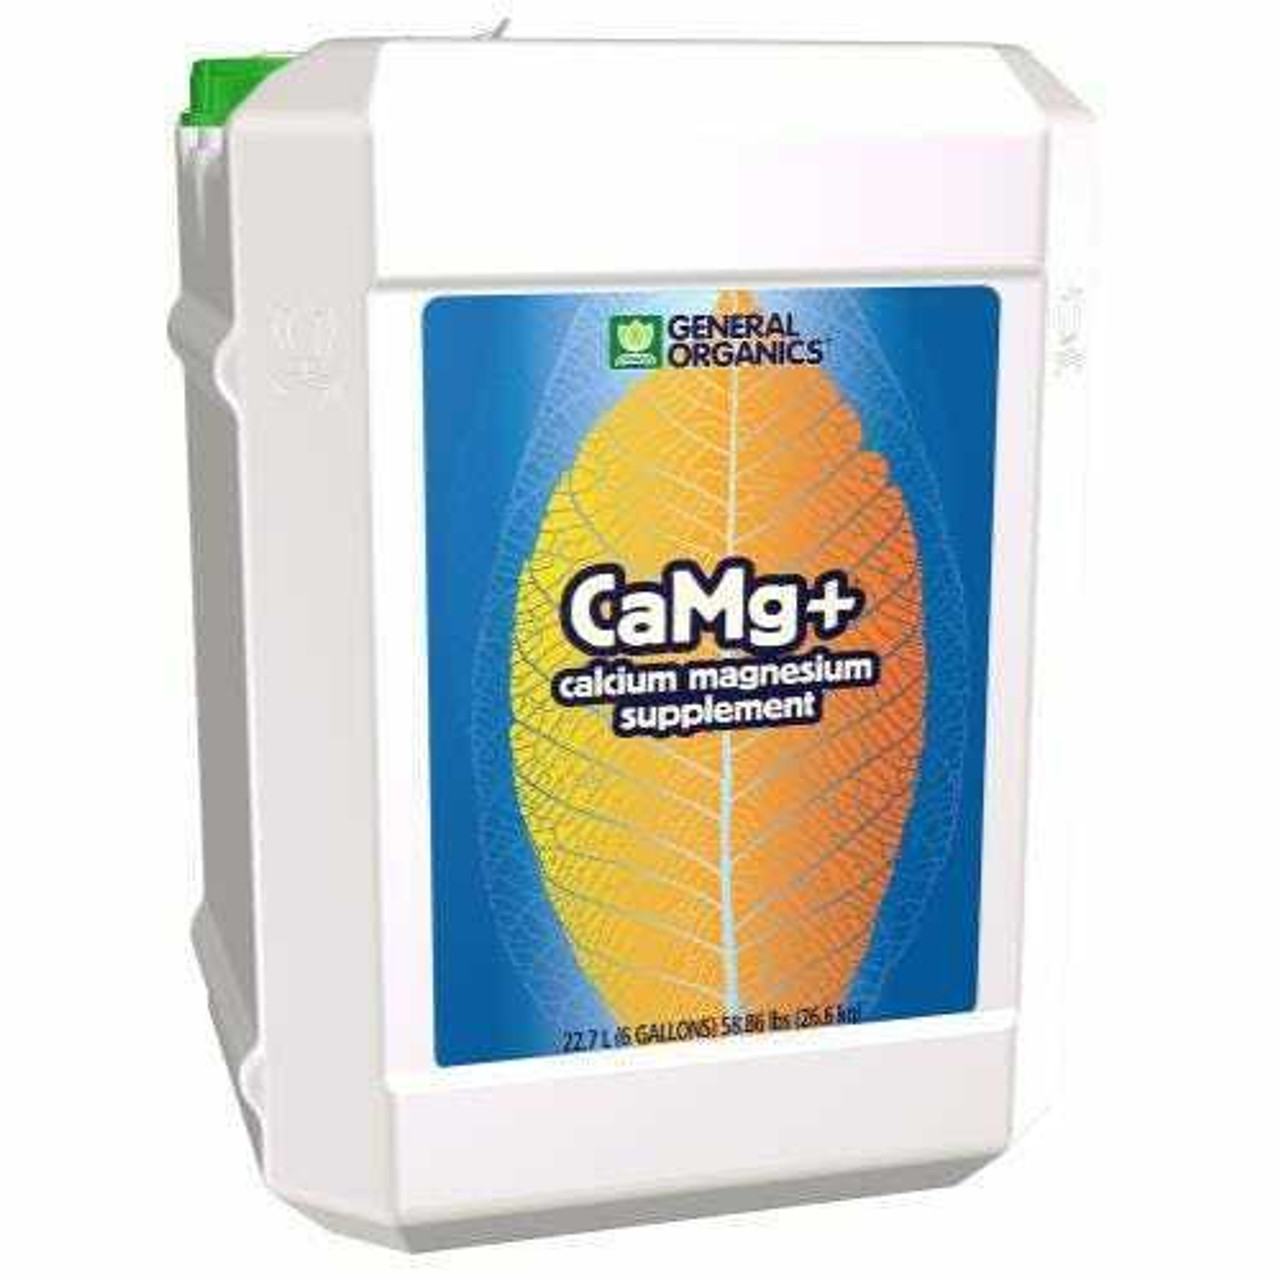 GH General Organics CaMg+ 6 Gallon (Freight/In-Store Pickup Only)